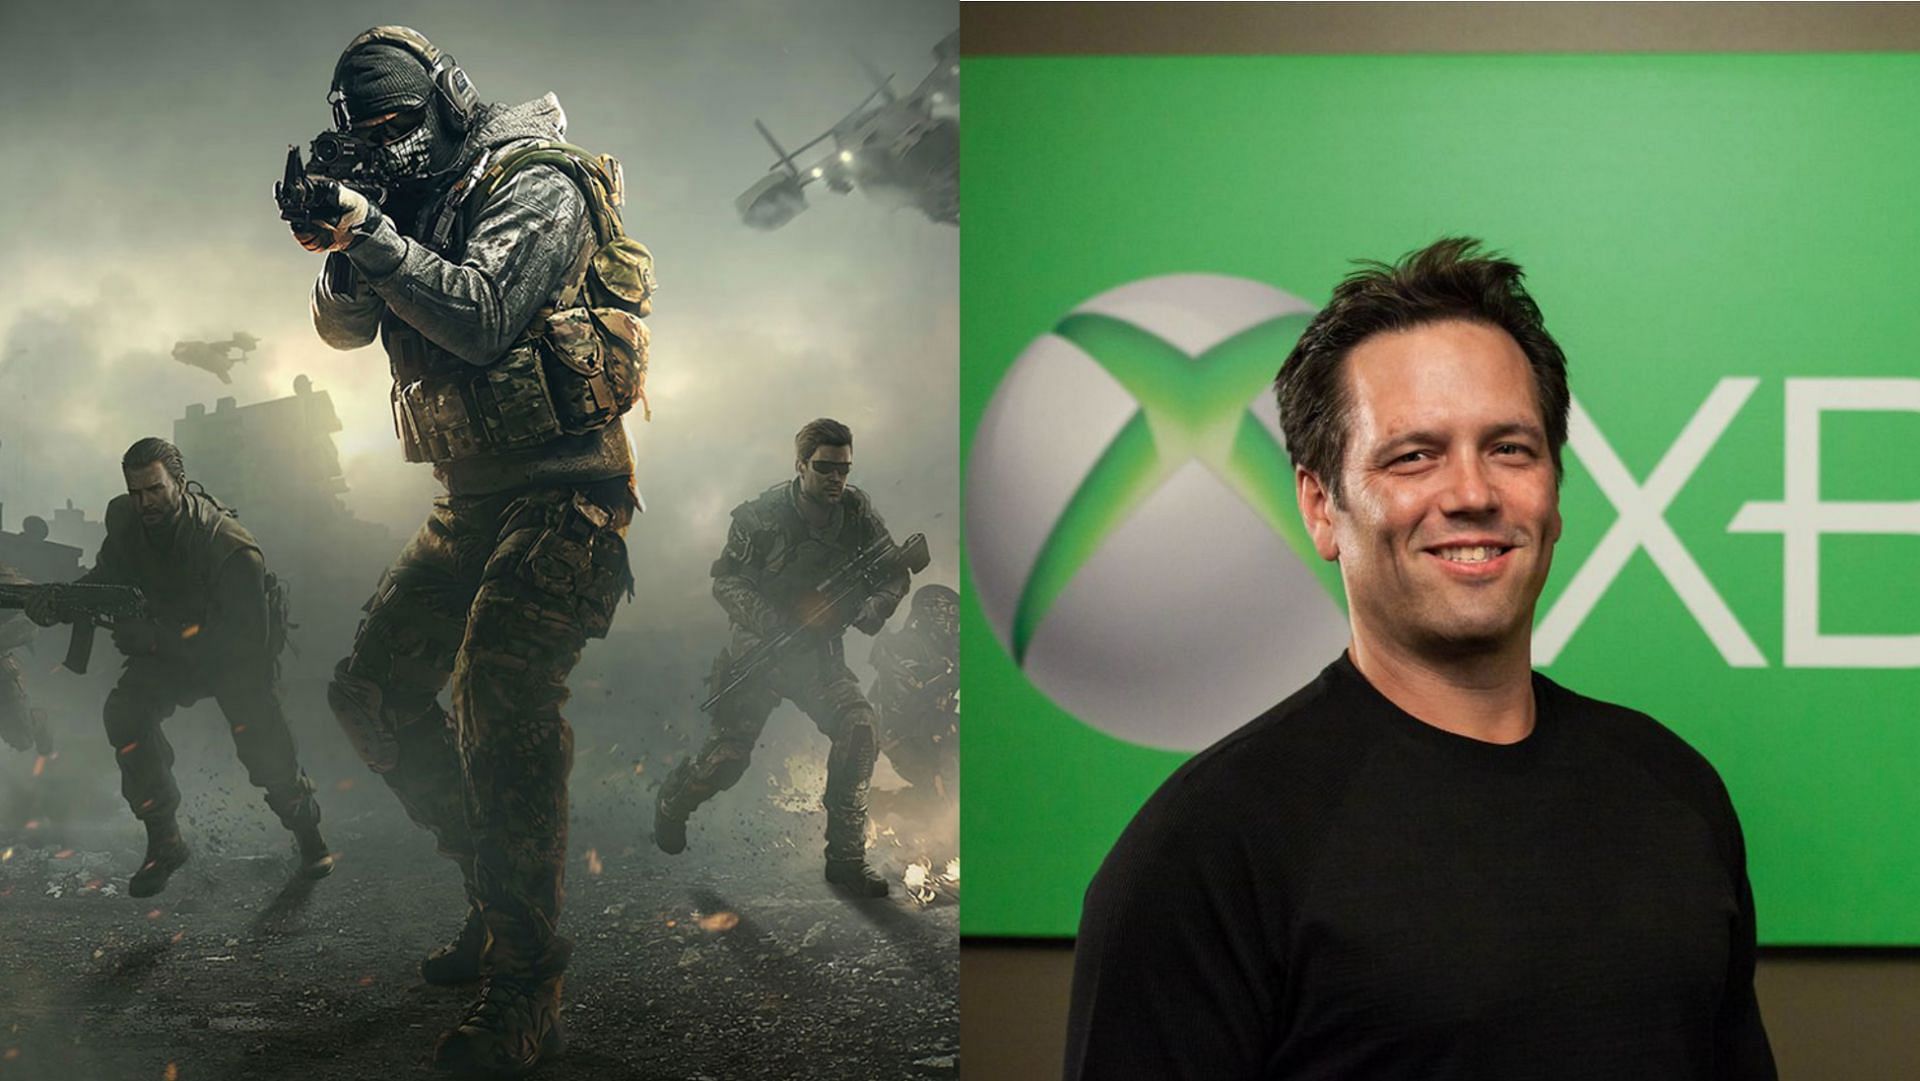 Tihngs are looking positive for the deal according to Phil Spencer (Images via Activision, Xbox)